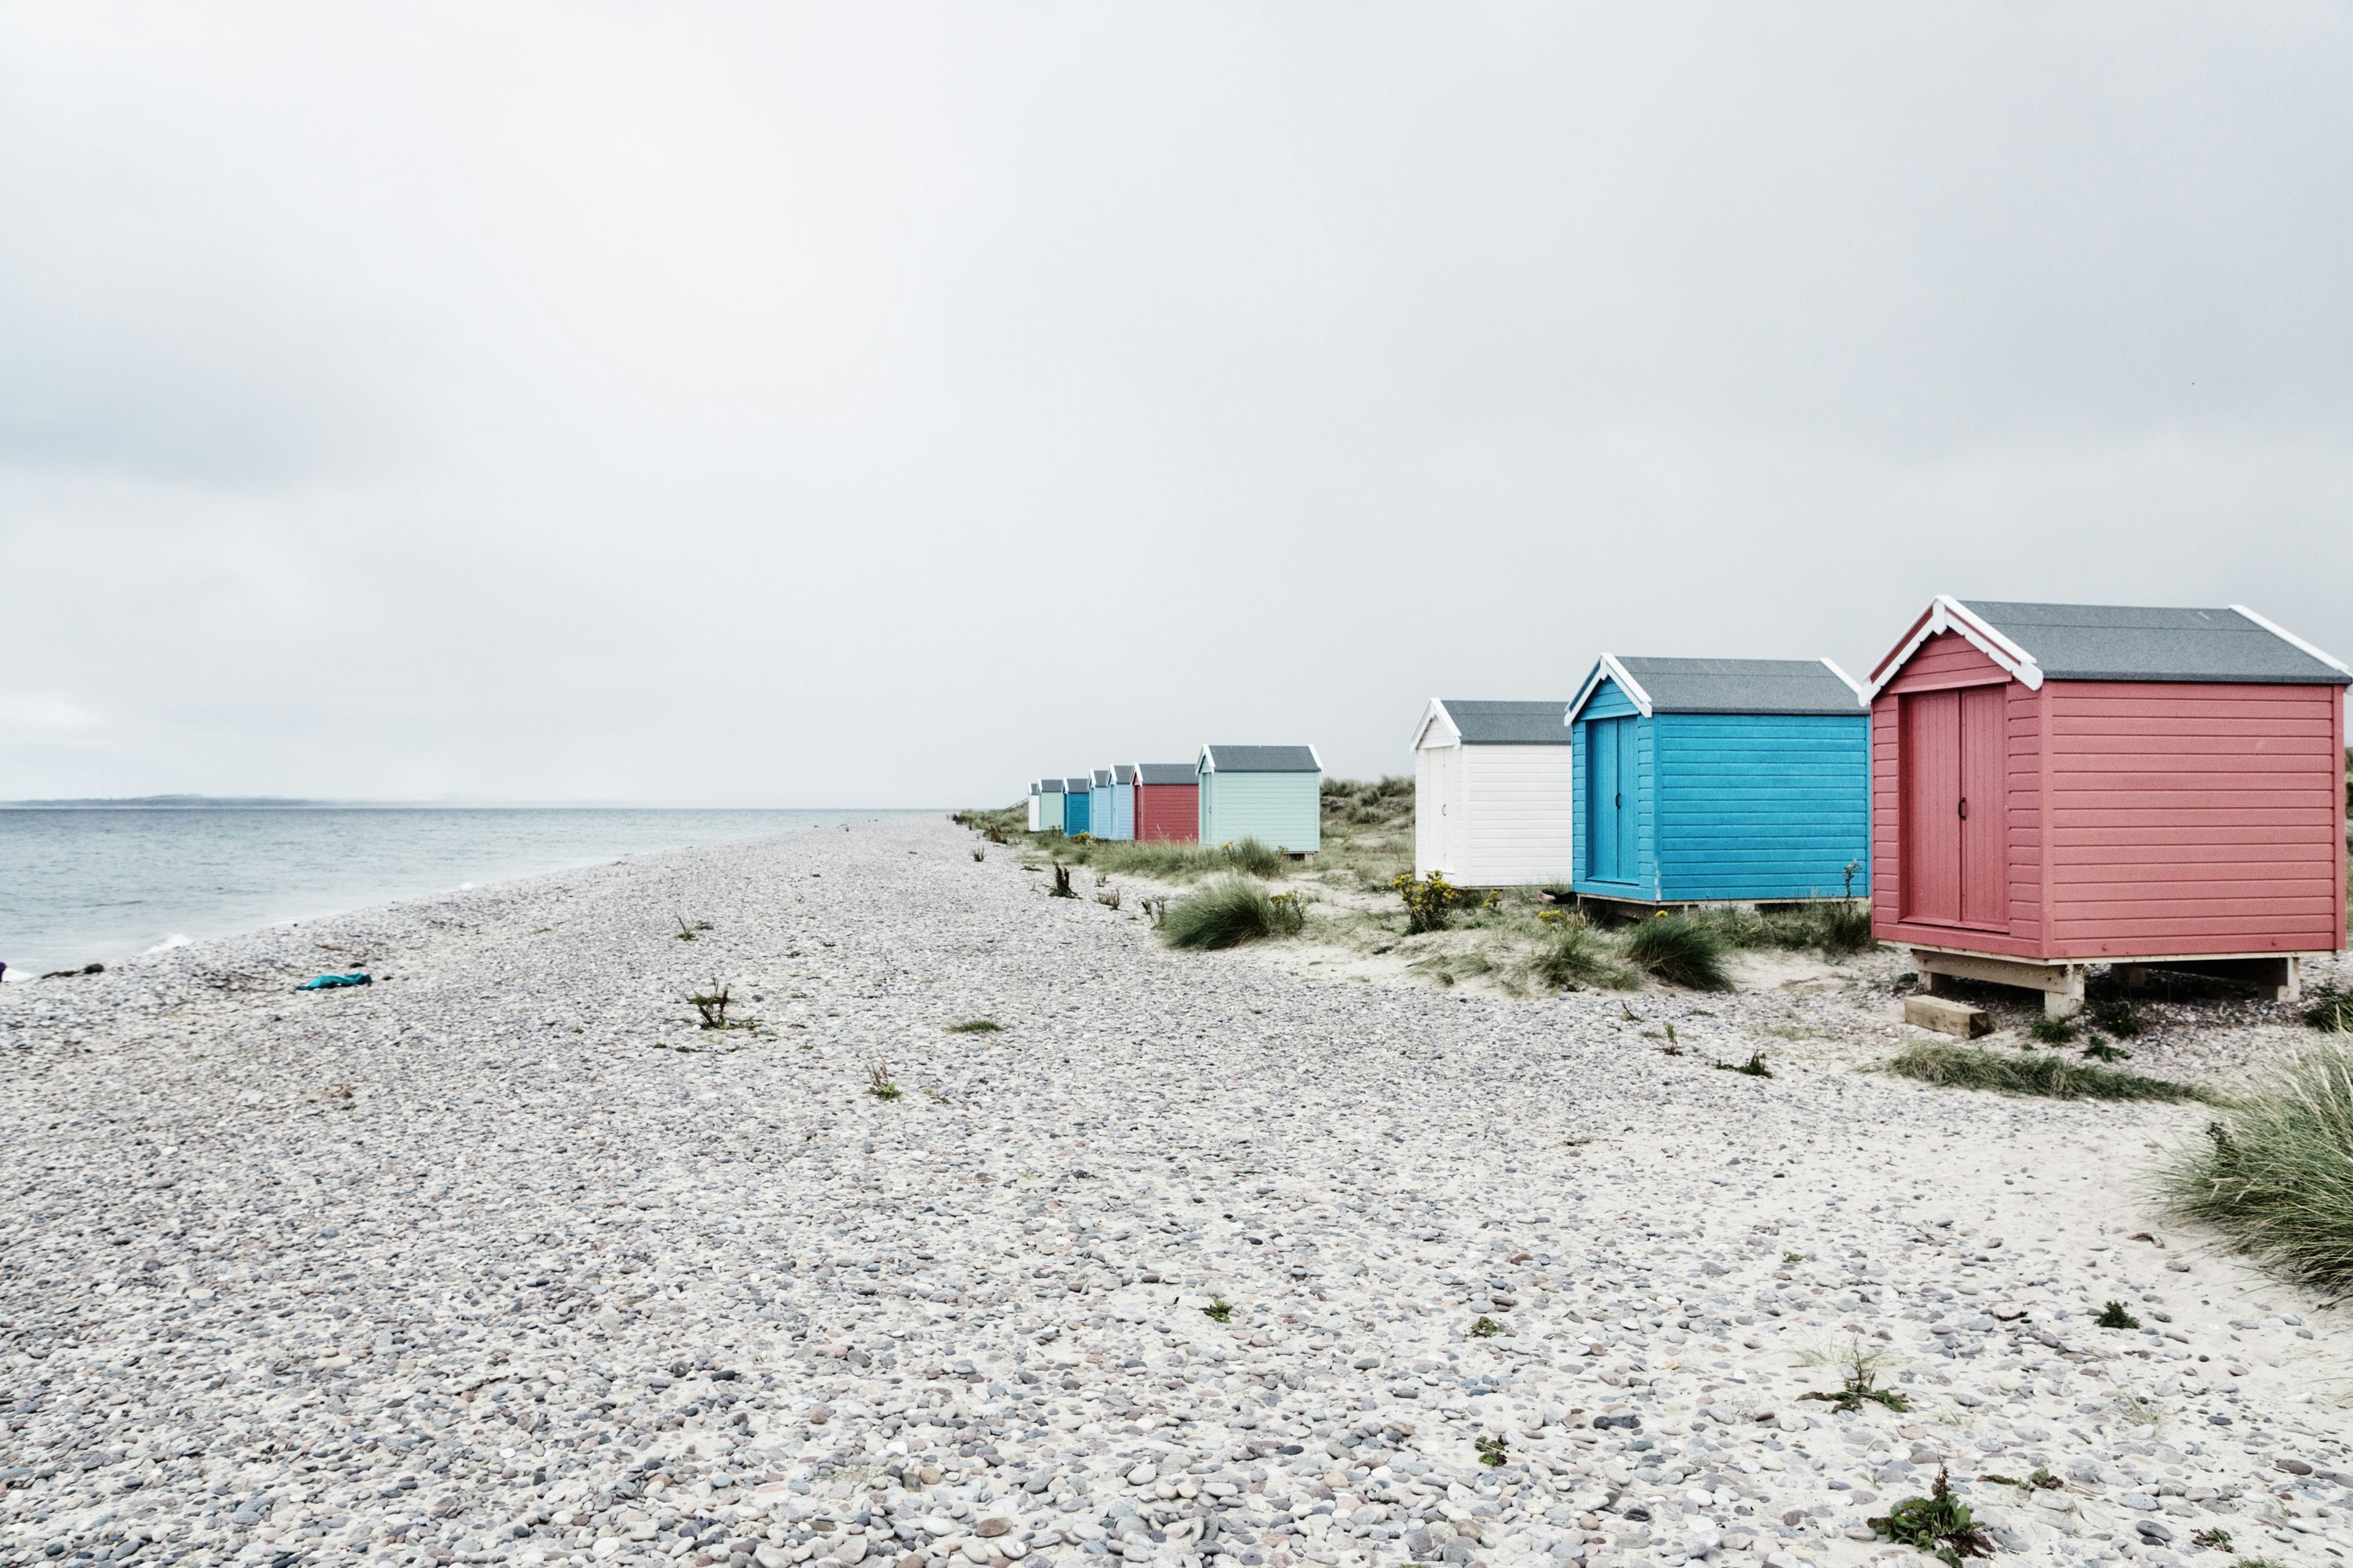 assorted-color sheds near seashore at daytime